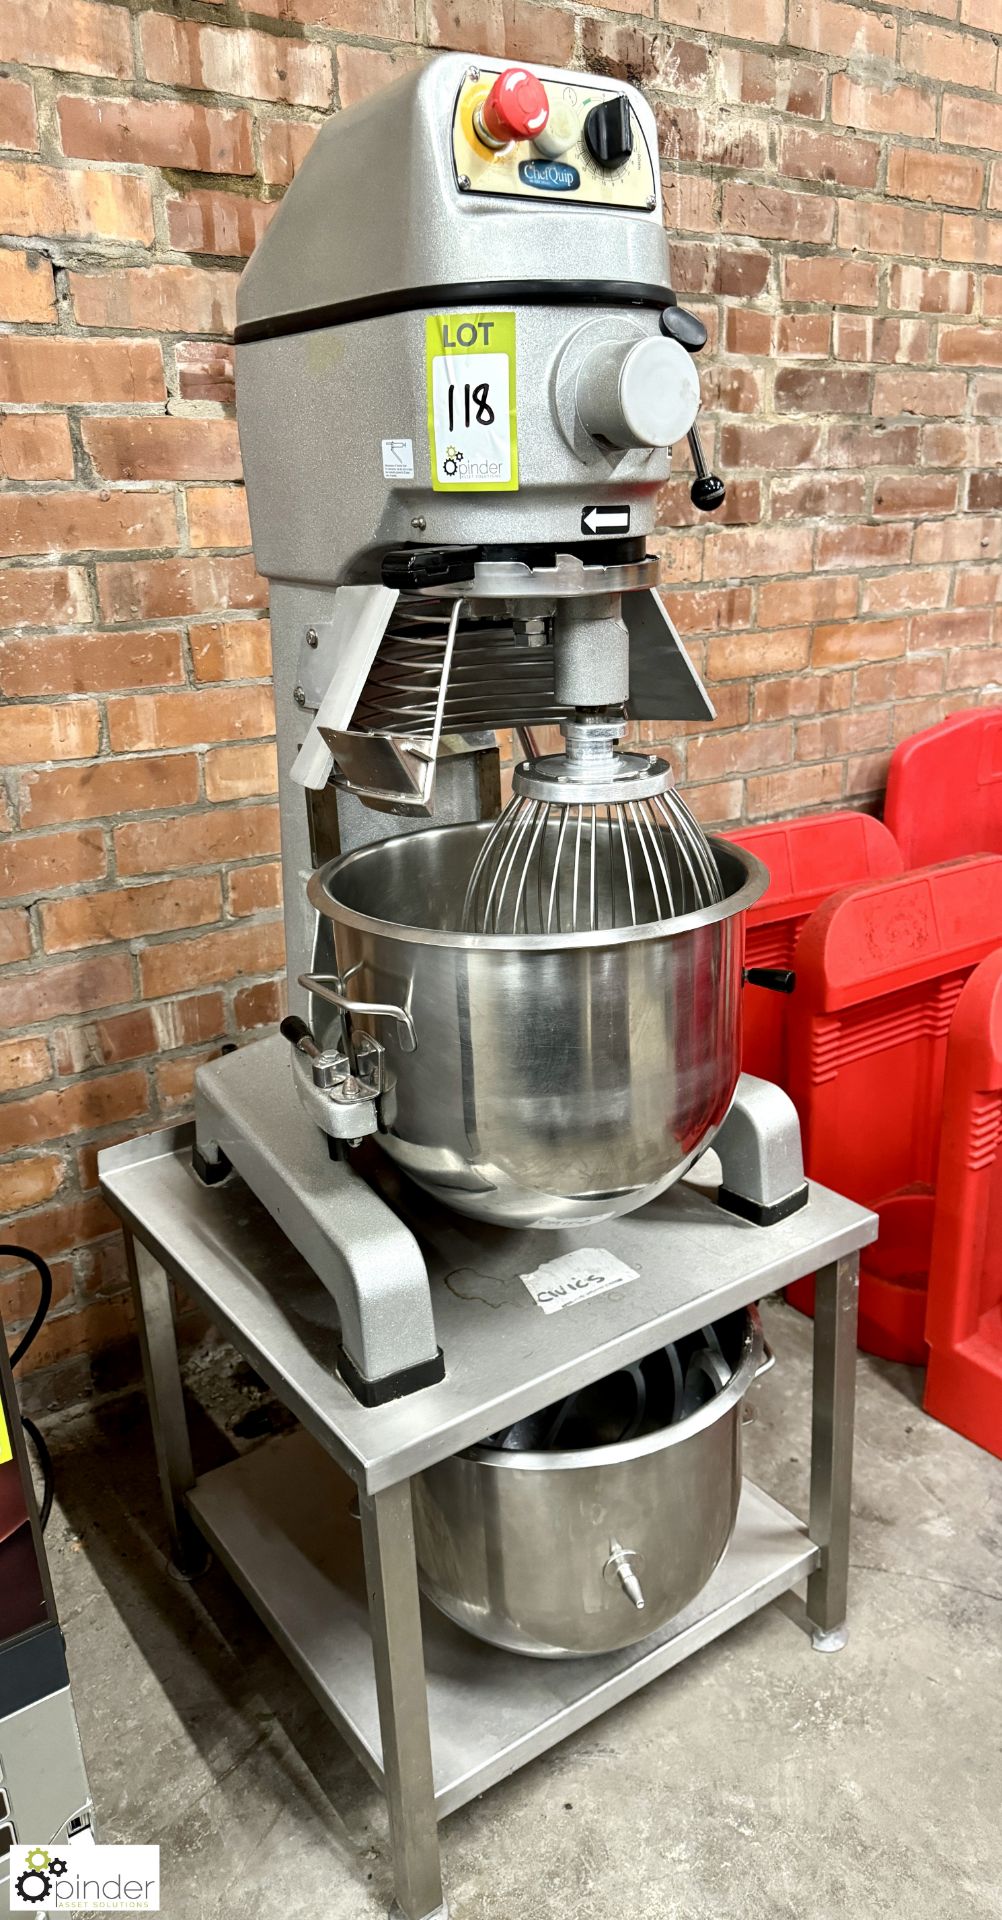 Spar Food Machinery SP-22HA-B Planetary Food Mixer, 240volts, with 2 bowls, whisk, dough hook,